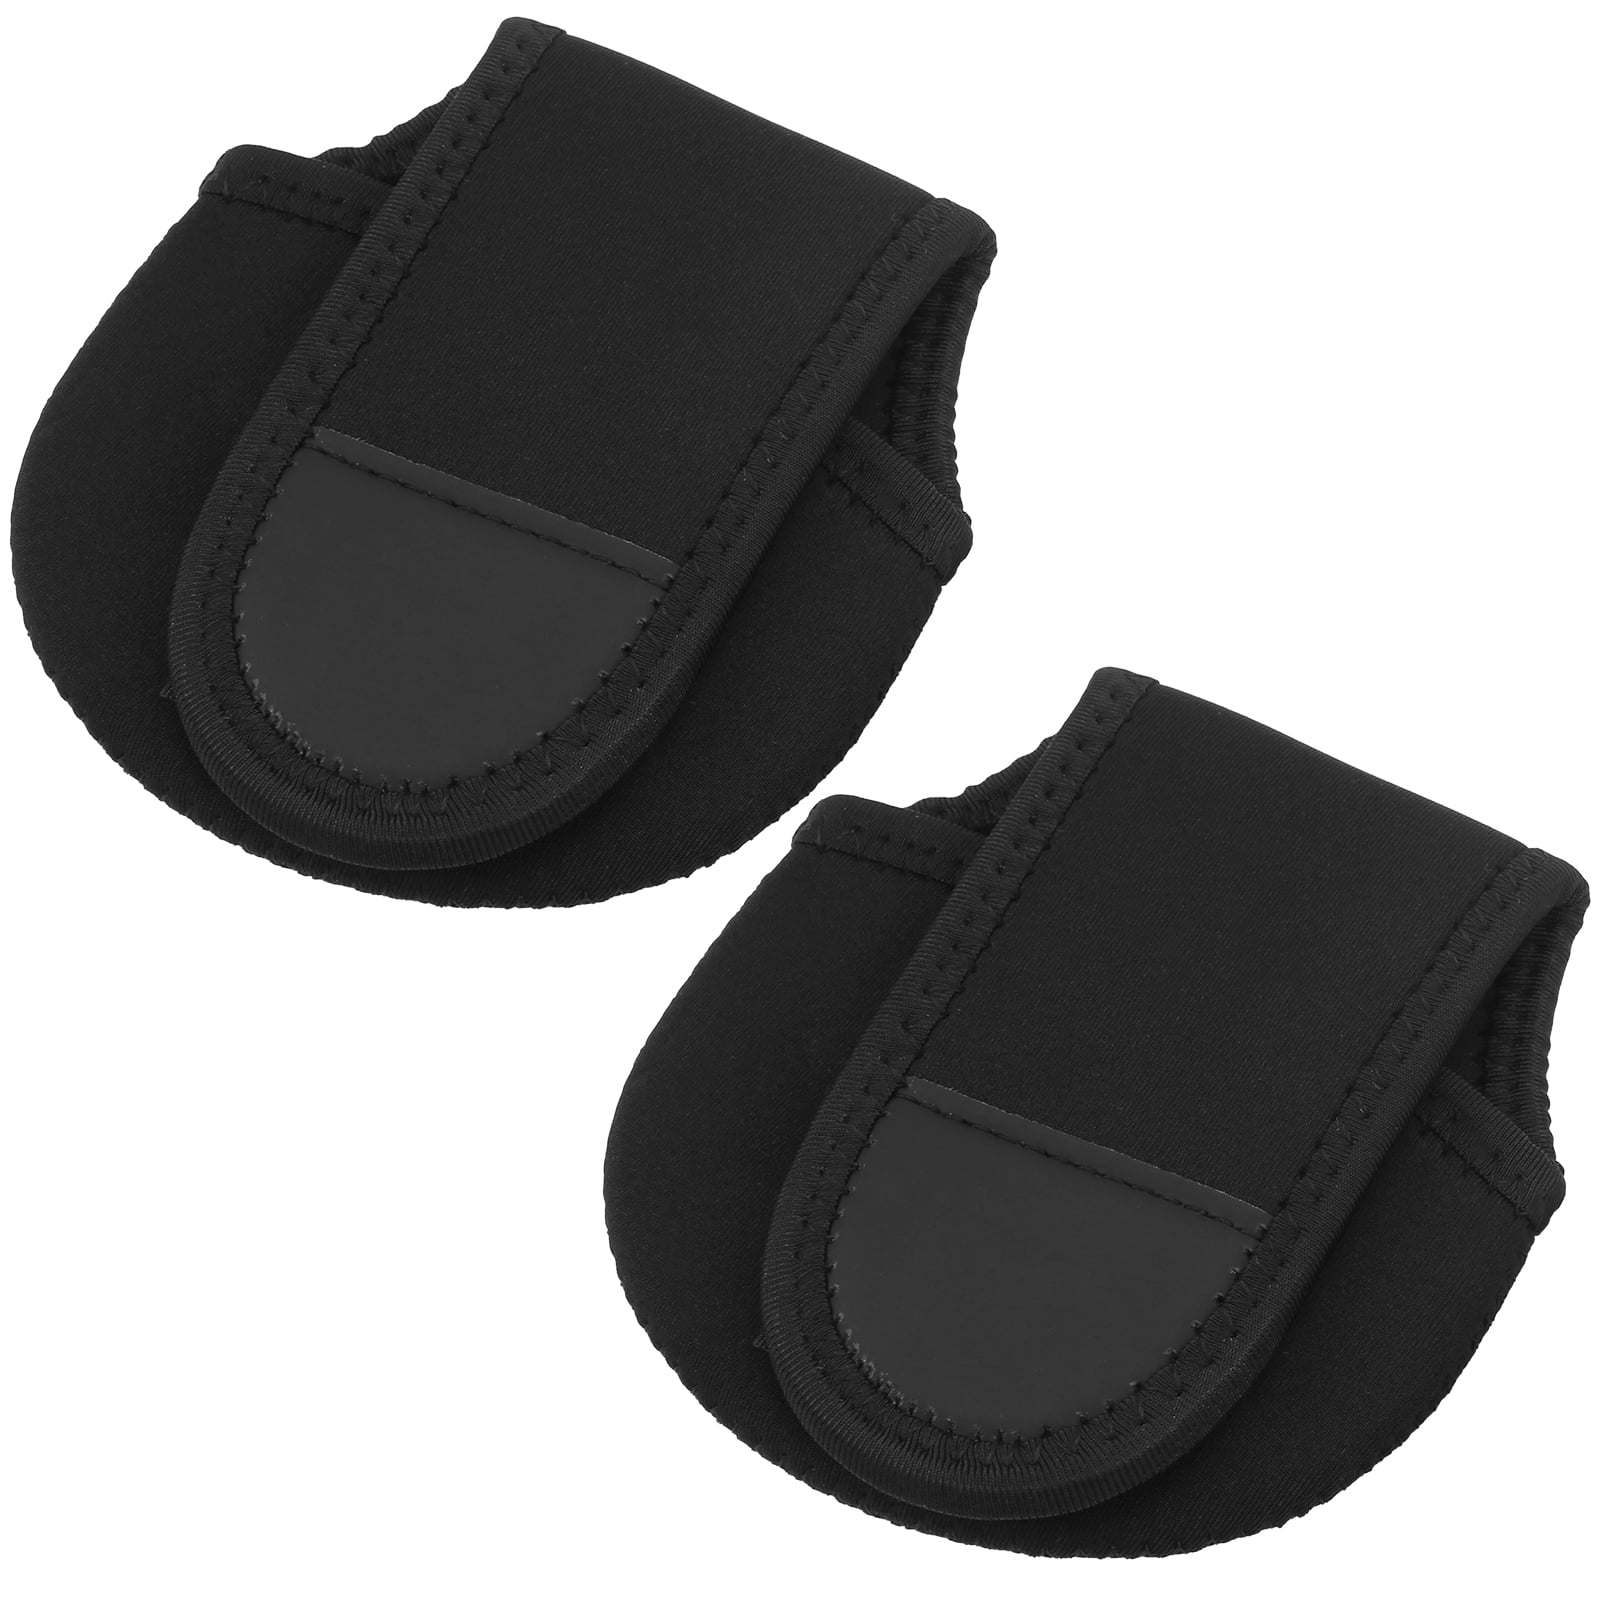 Baitcasting Reel Cover,2Pcs Baitcasting Reel Cover Case Protector Waterproof Baitcast Reel Protective Case Pouch 